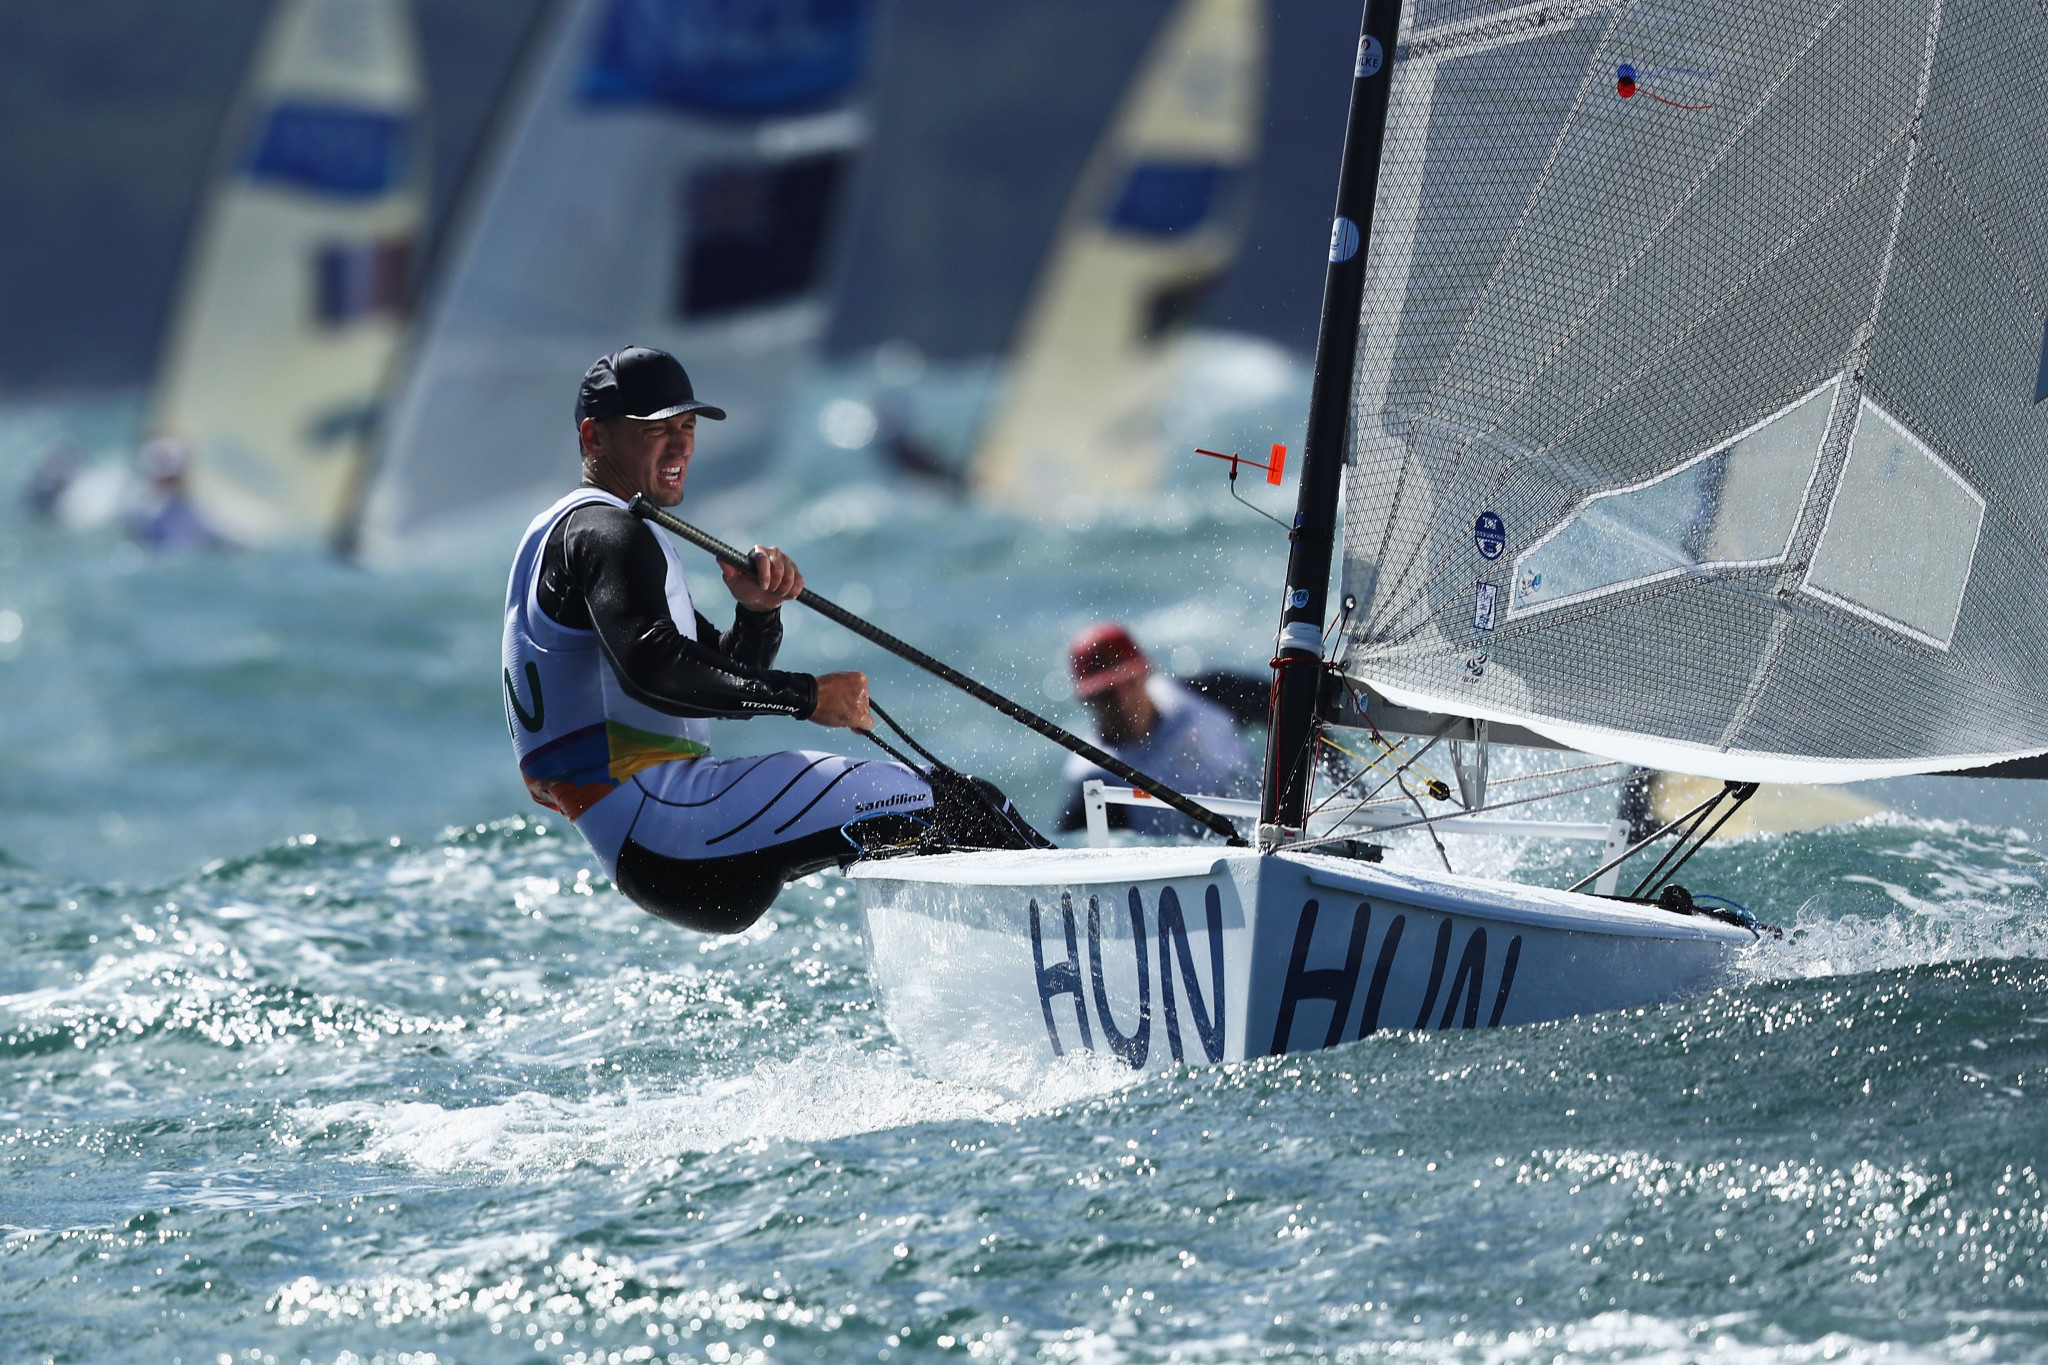 Hungary's Zsombor Berecz leads Britain's defending champion Giles Scott by three points at the Finn European Championships in Gdynia©Getty Images